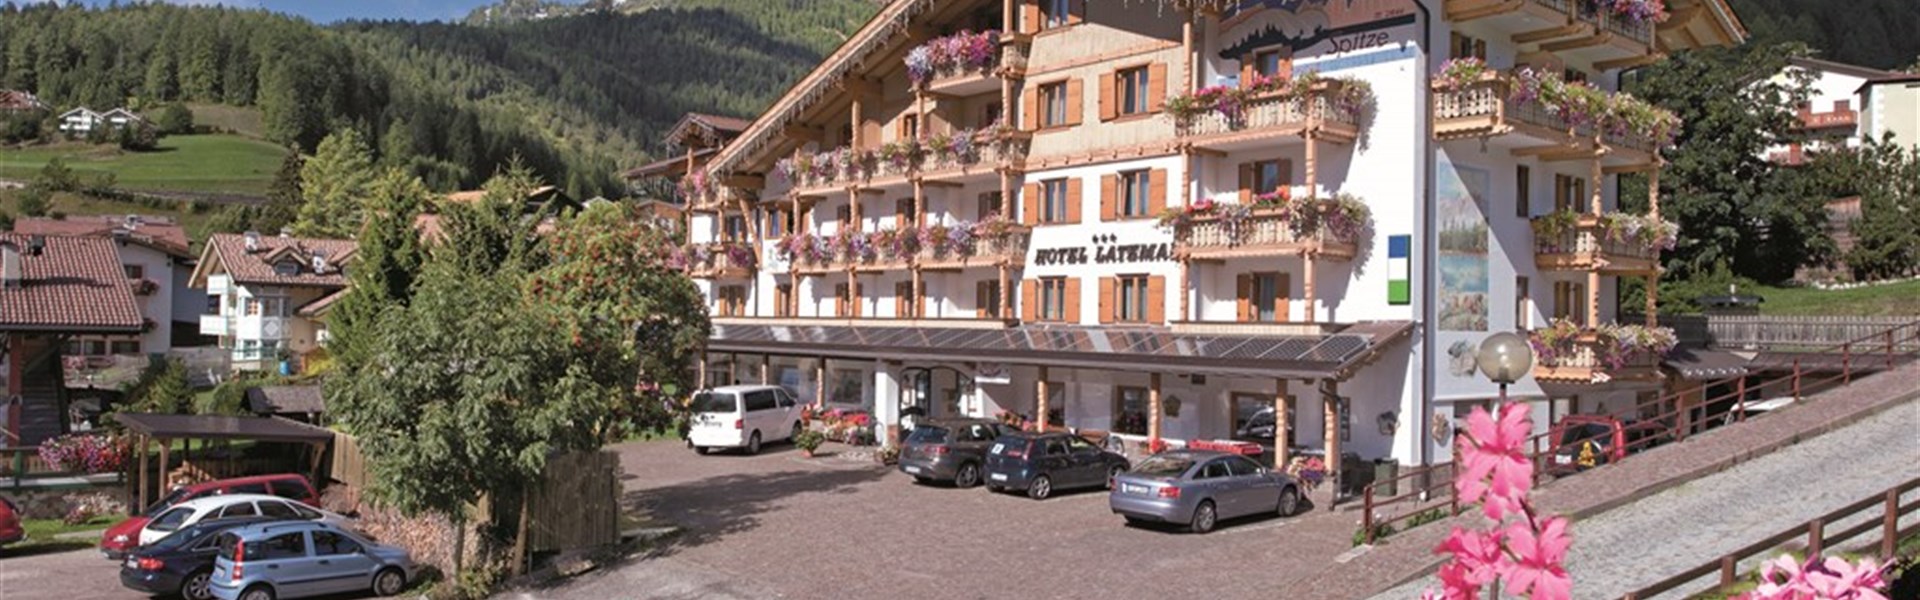 Marco Polo - Hotel Latemar  (léto / Sommer) - 